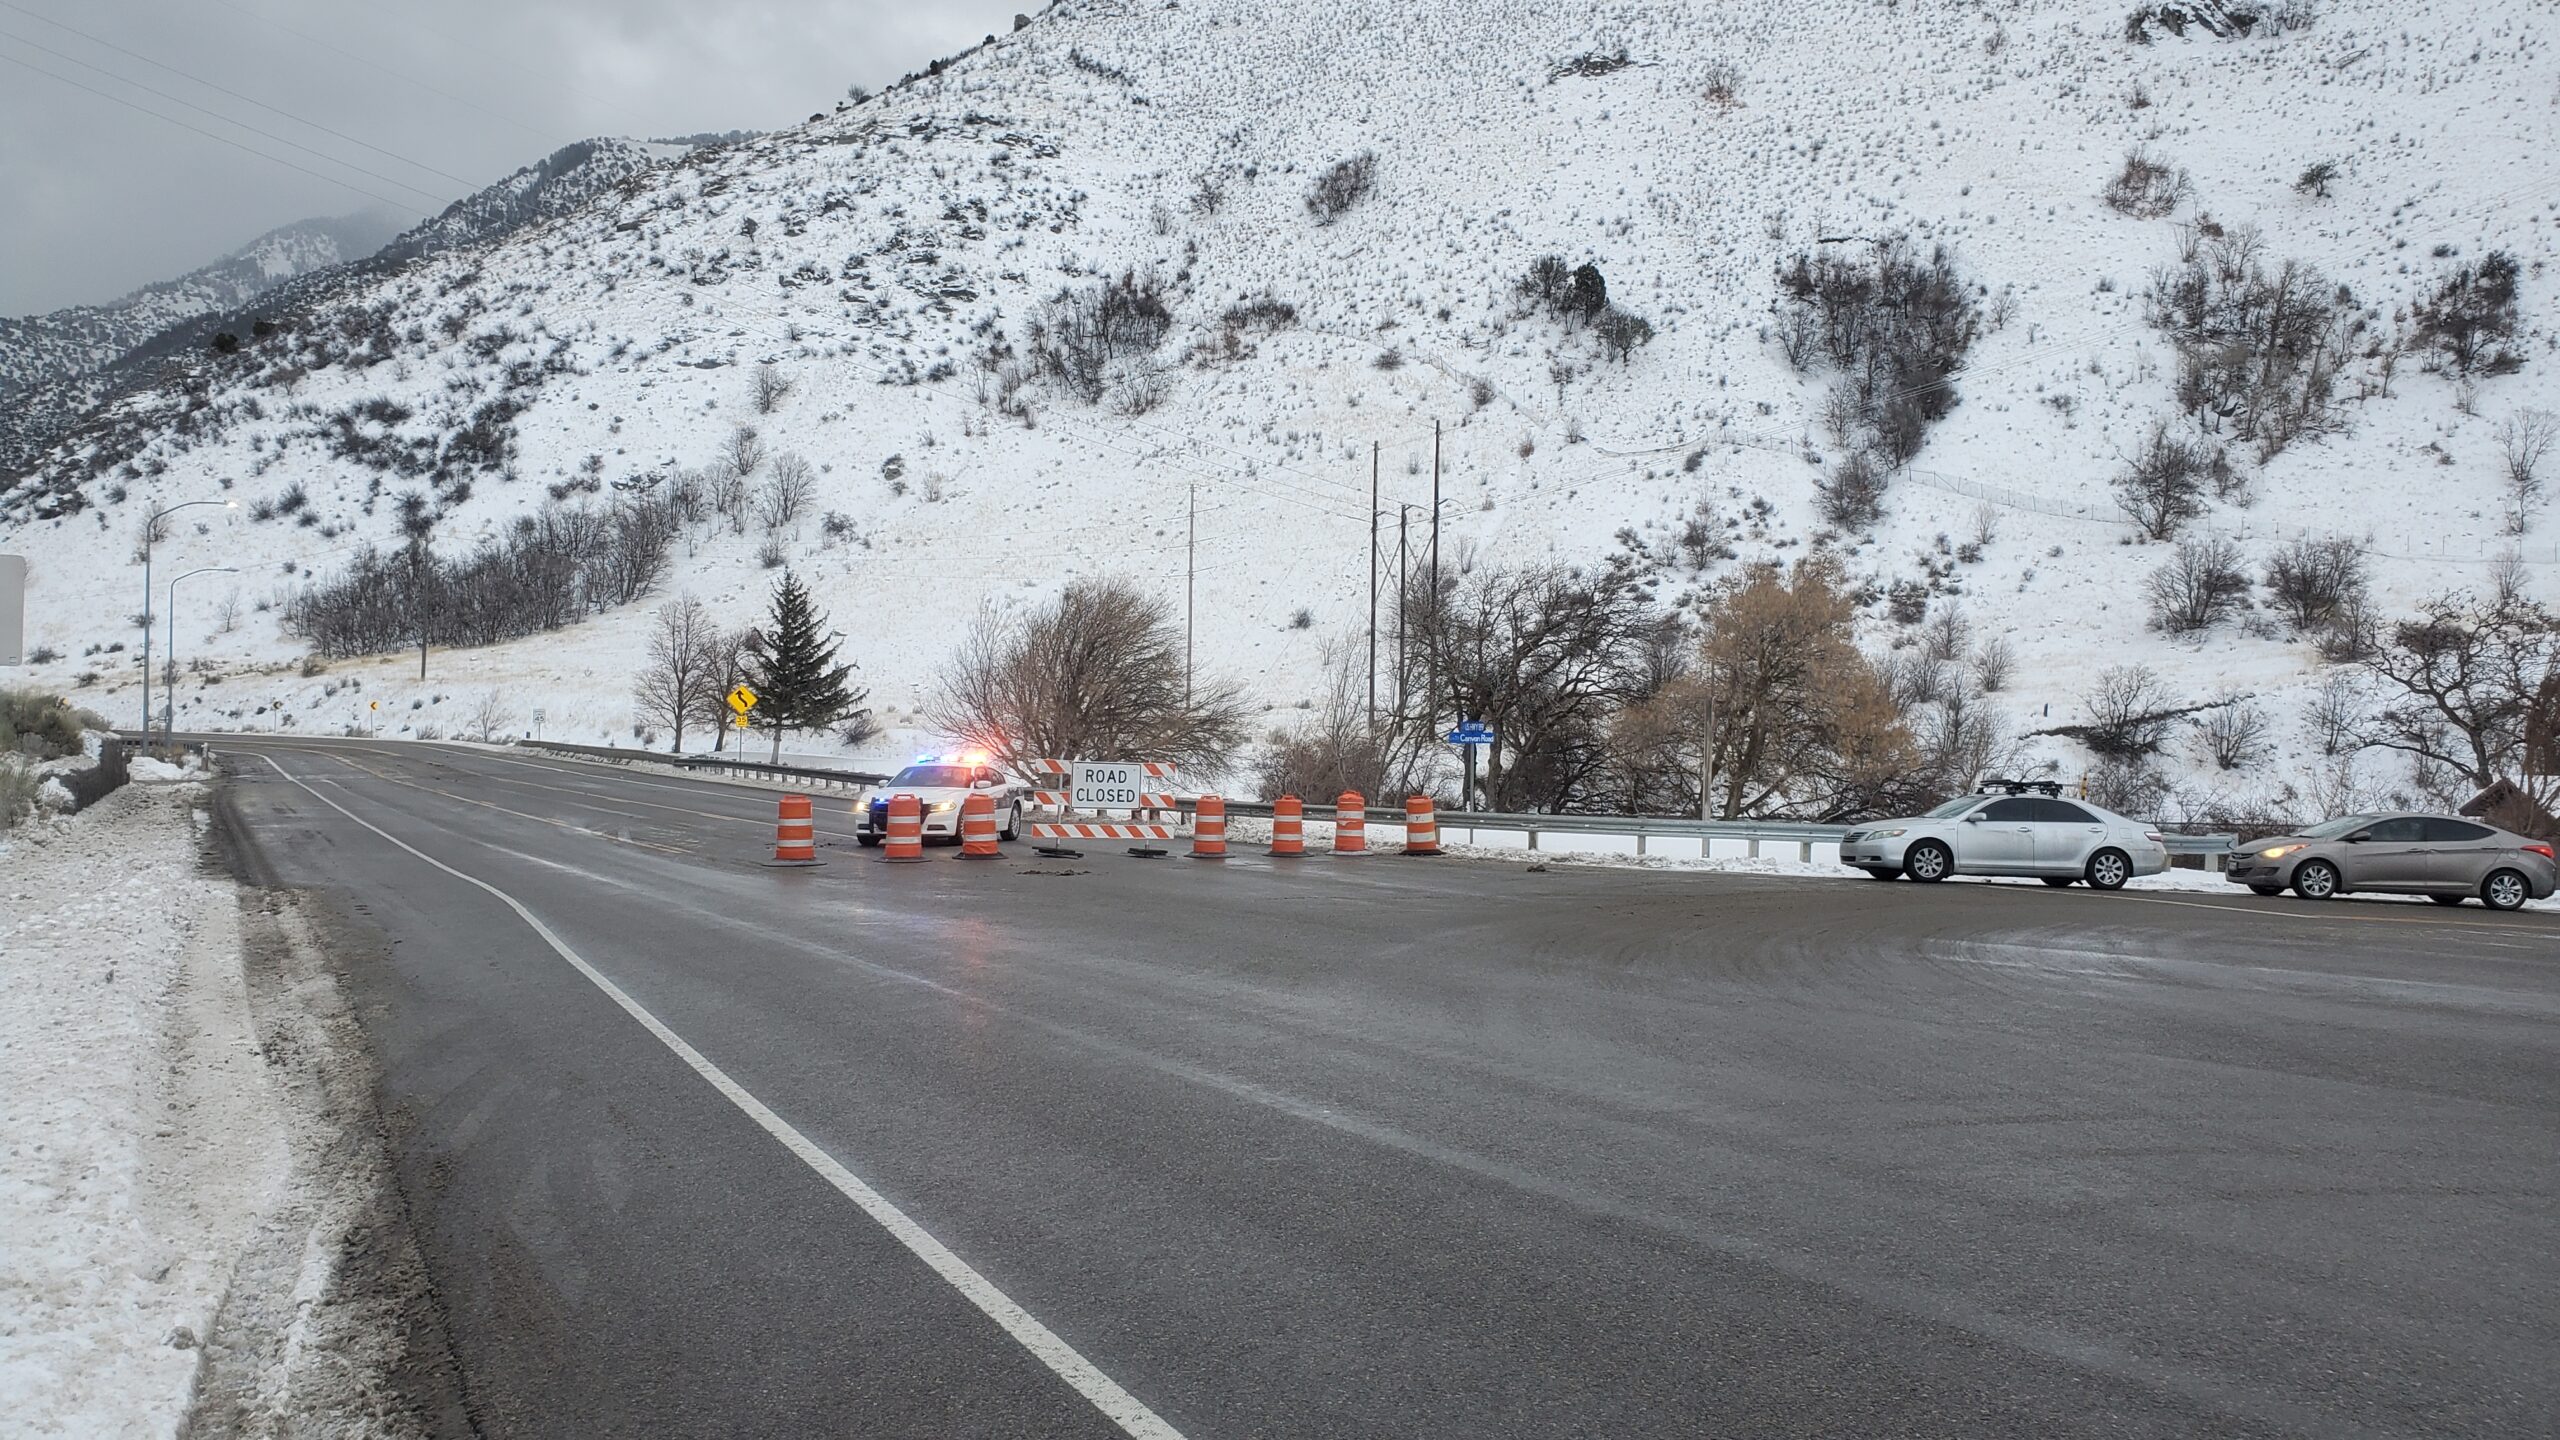 Police cars block U.S. Highway 89 in Logan Canyon following an avalanche....